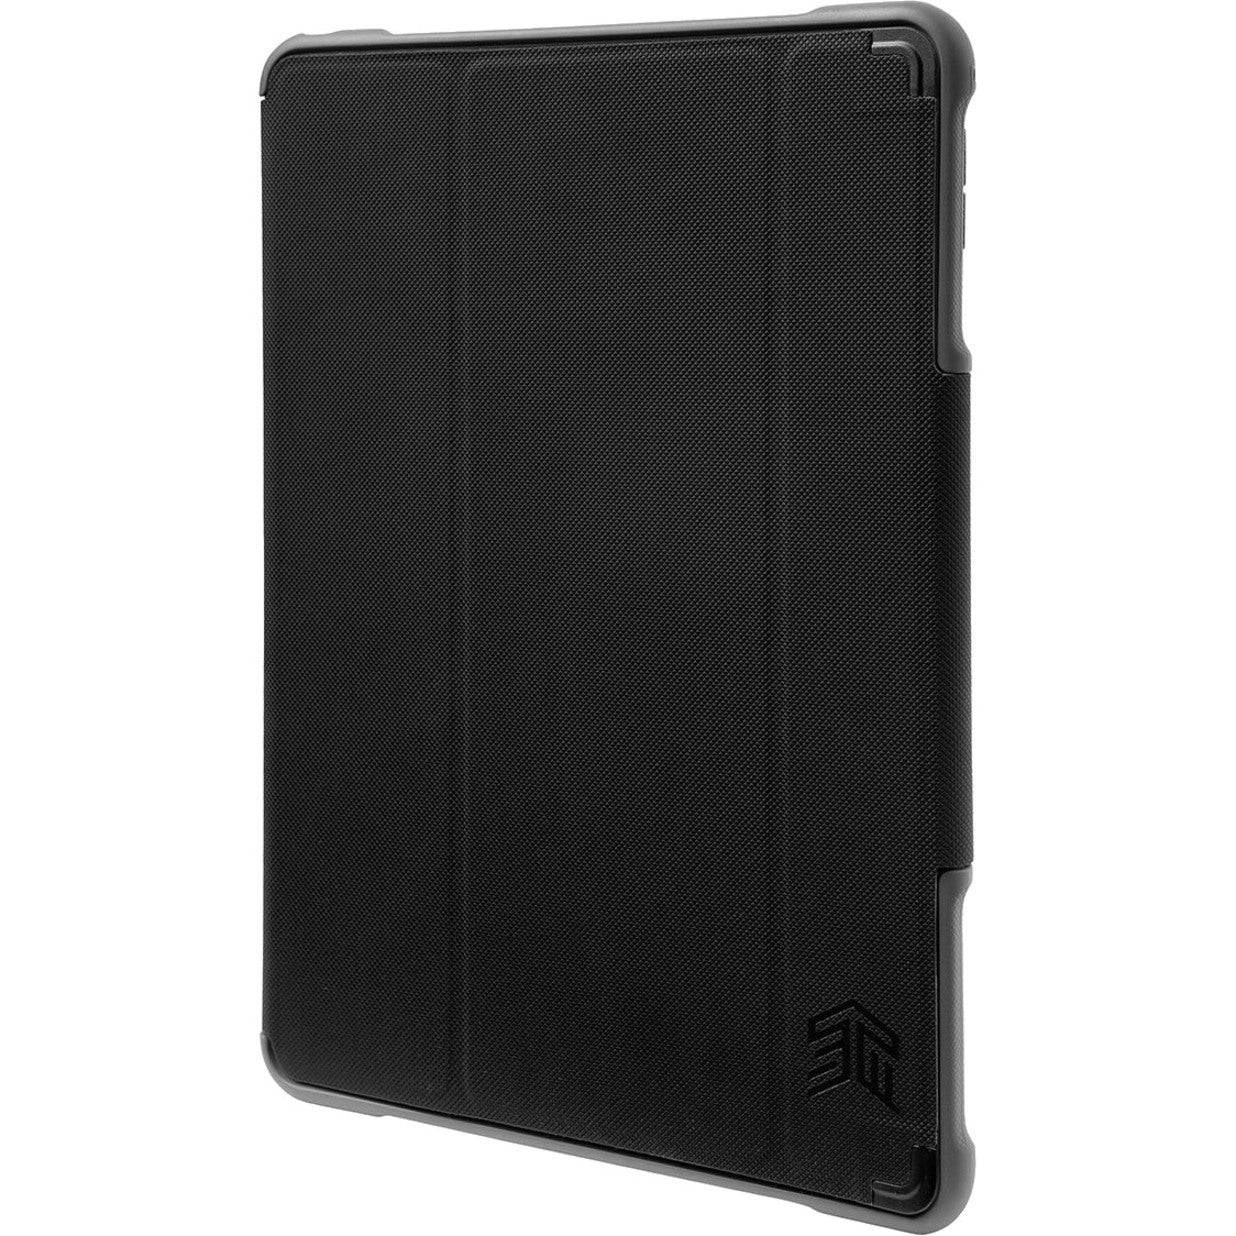 STM Goods STM-222-160JW-01 Dux Rugged Case for Apple iPad (2017) 5th & 6th Gen 9.7" iPad, Black - Spill Resistant, Water Resistant, Drop Resistant